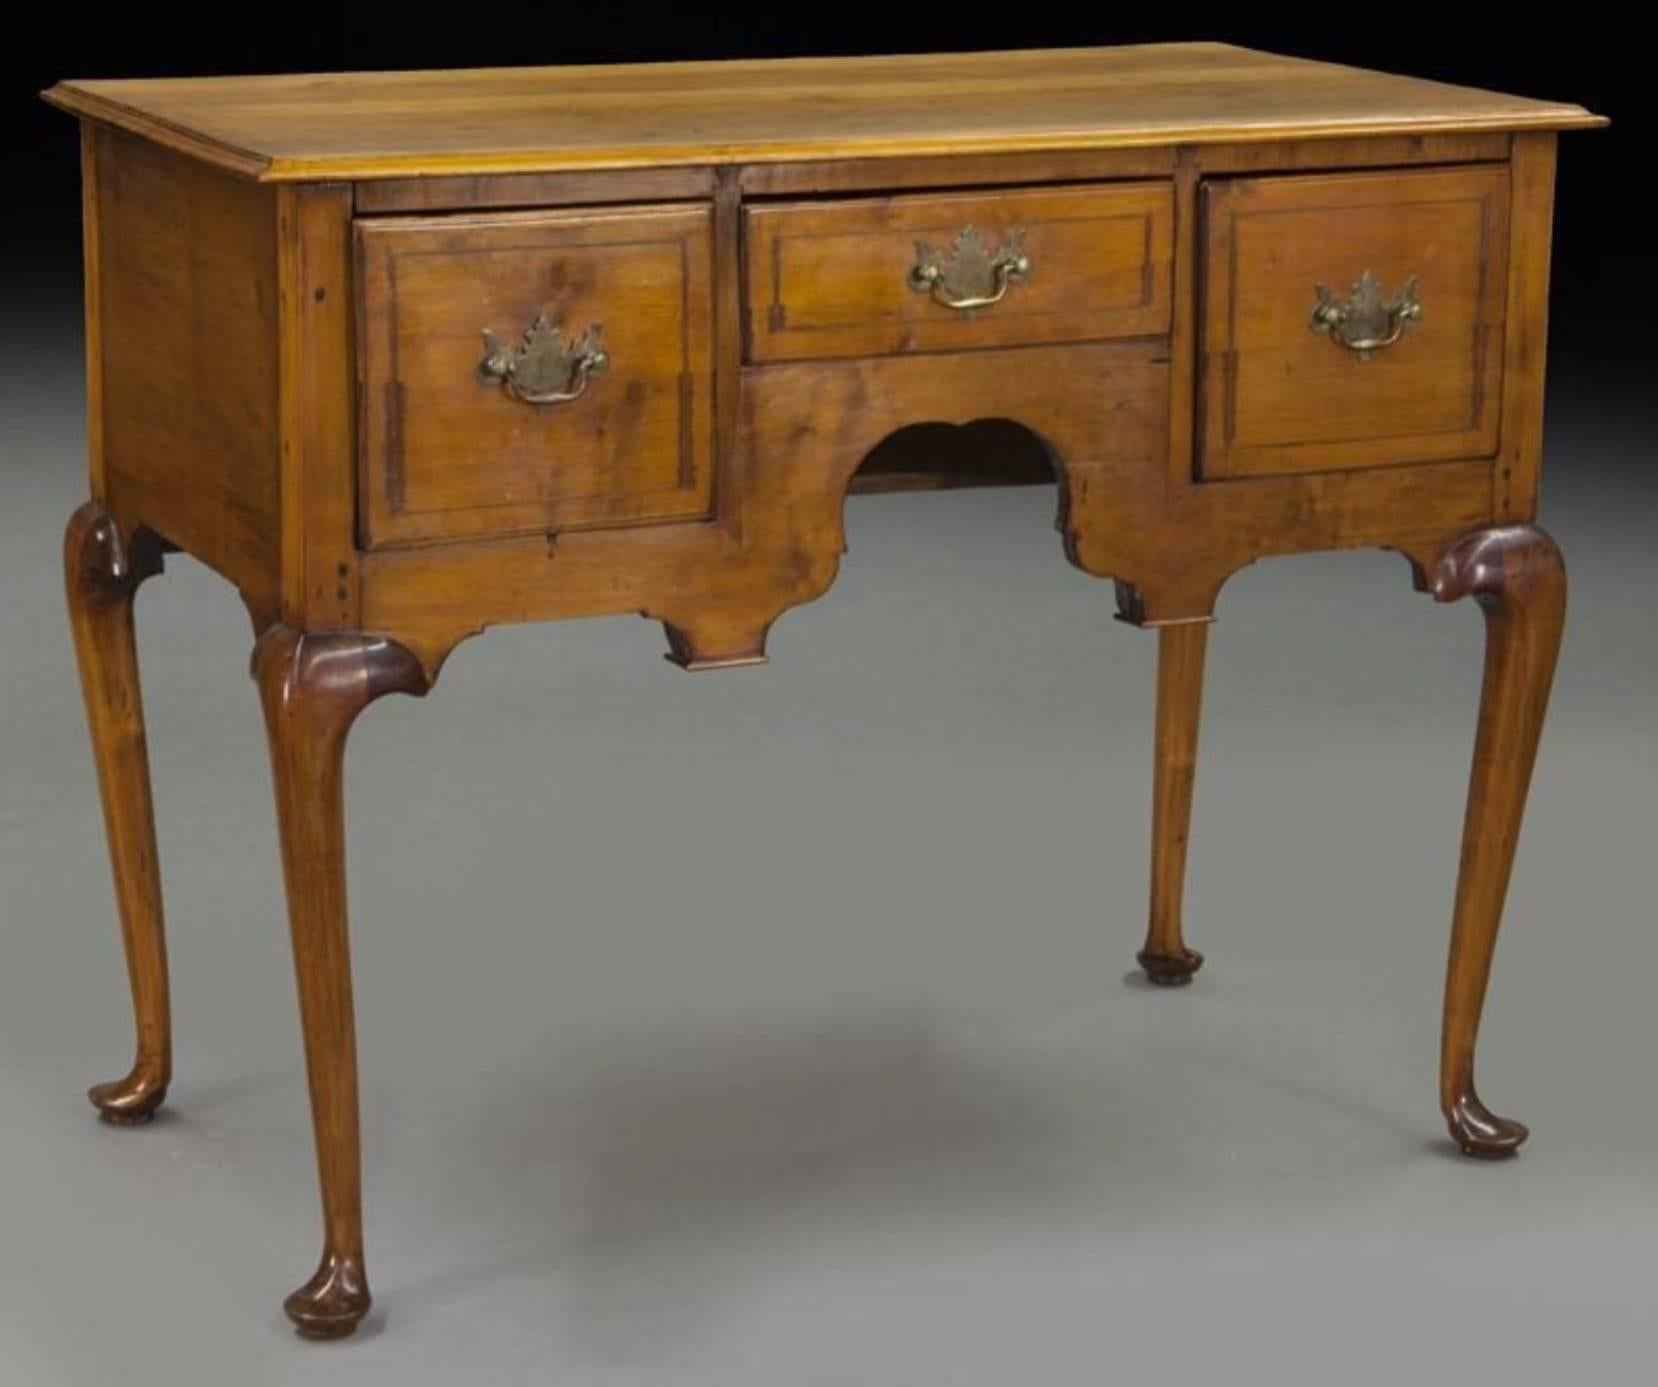 
American 18th century maple dressing table with overhanging rectangular top, over three drawers with shaped apron and standing on tall Queen Anne style legs. Living room, hall and bedroom table.

Measures: 31.5